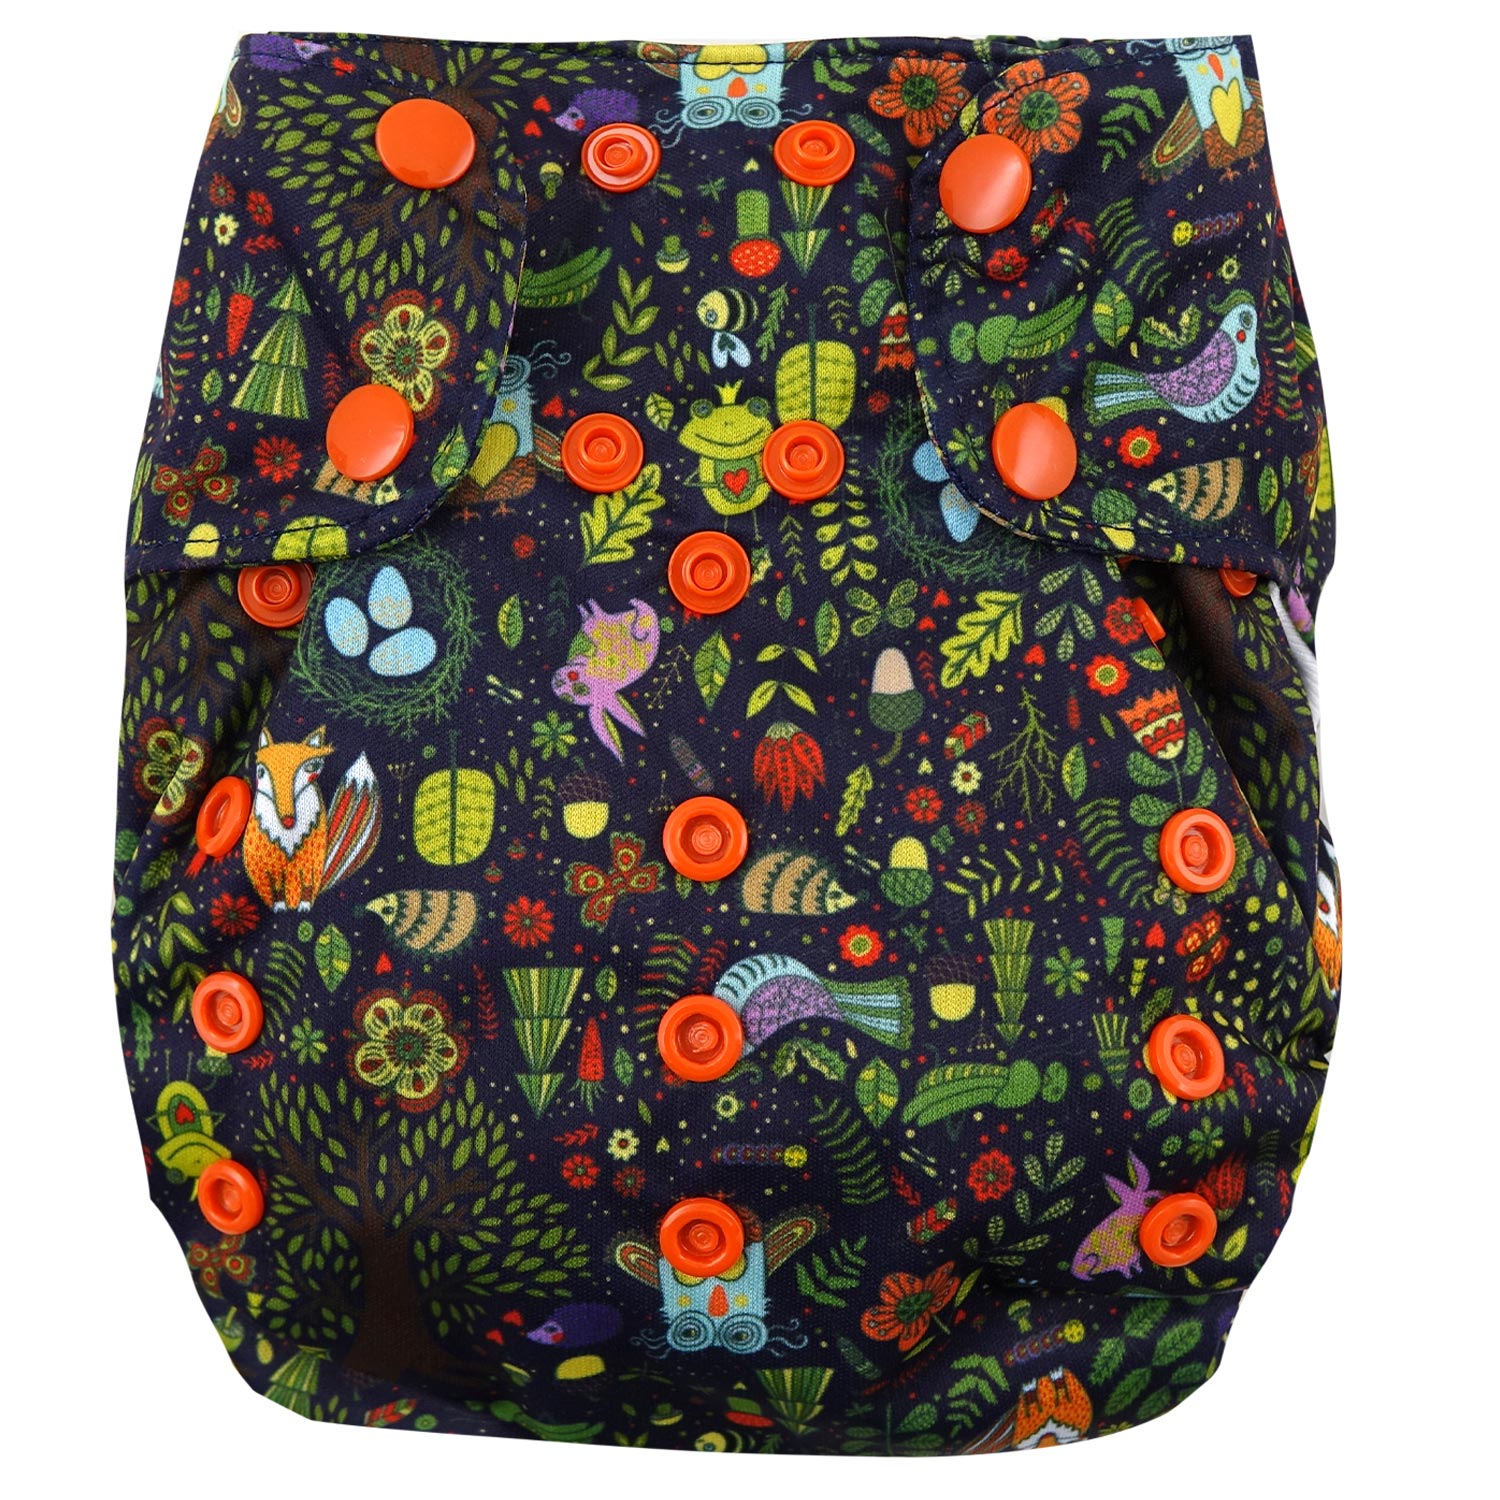 Smart Bottoms Dream Diaper 2.0 AIO One Size Pattern: Enchanted